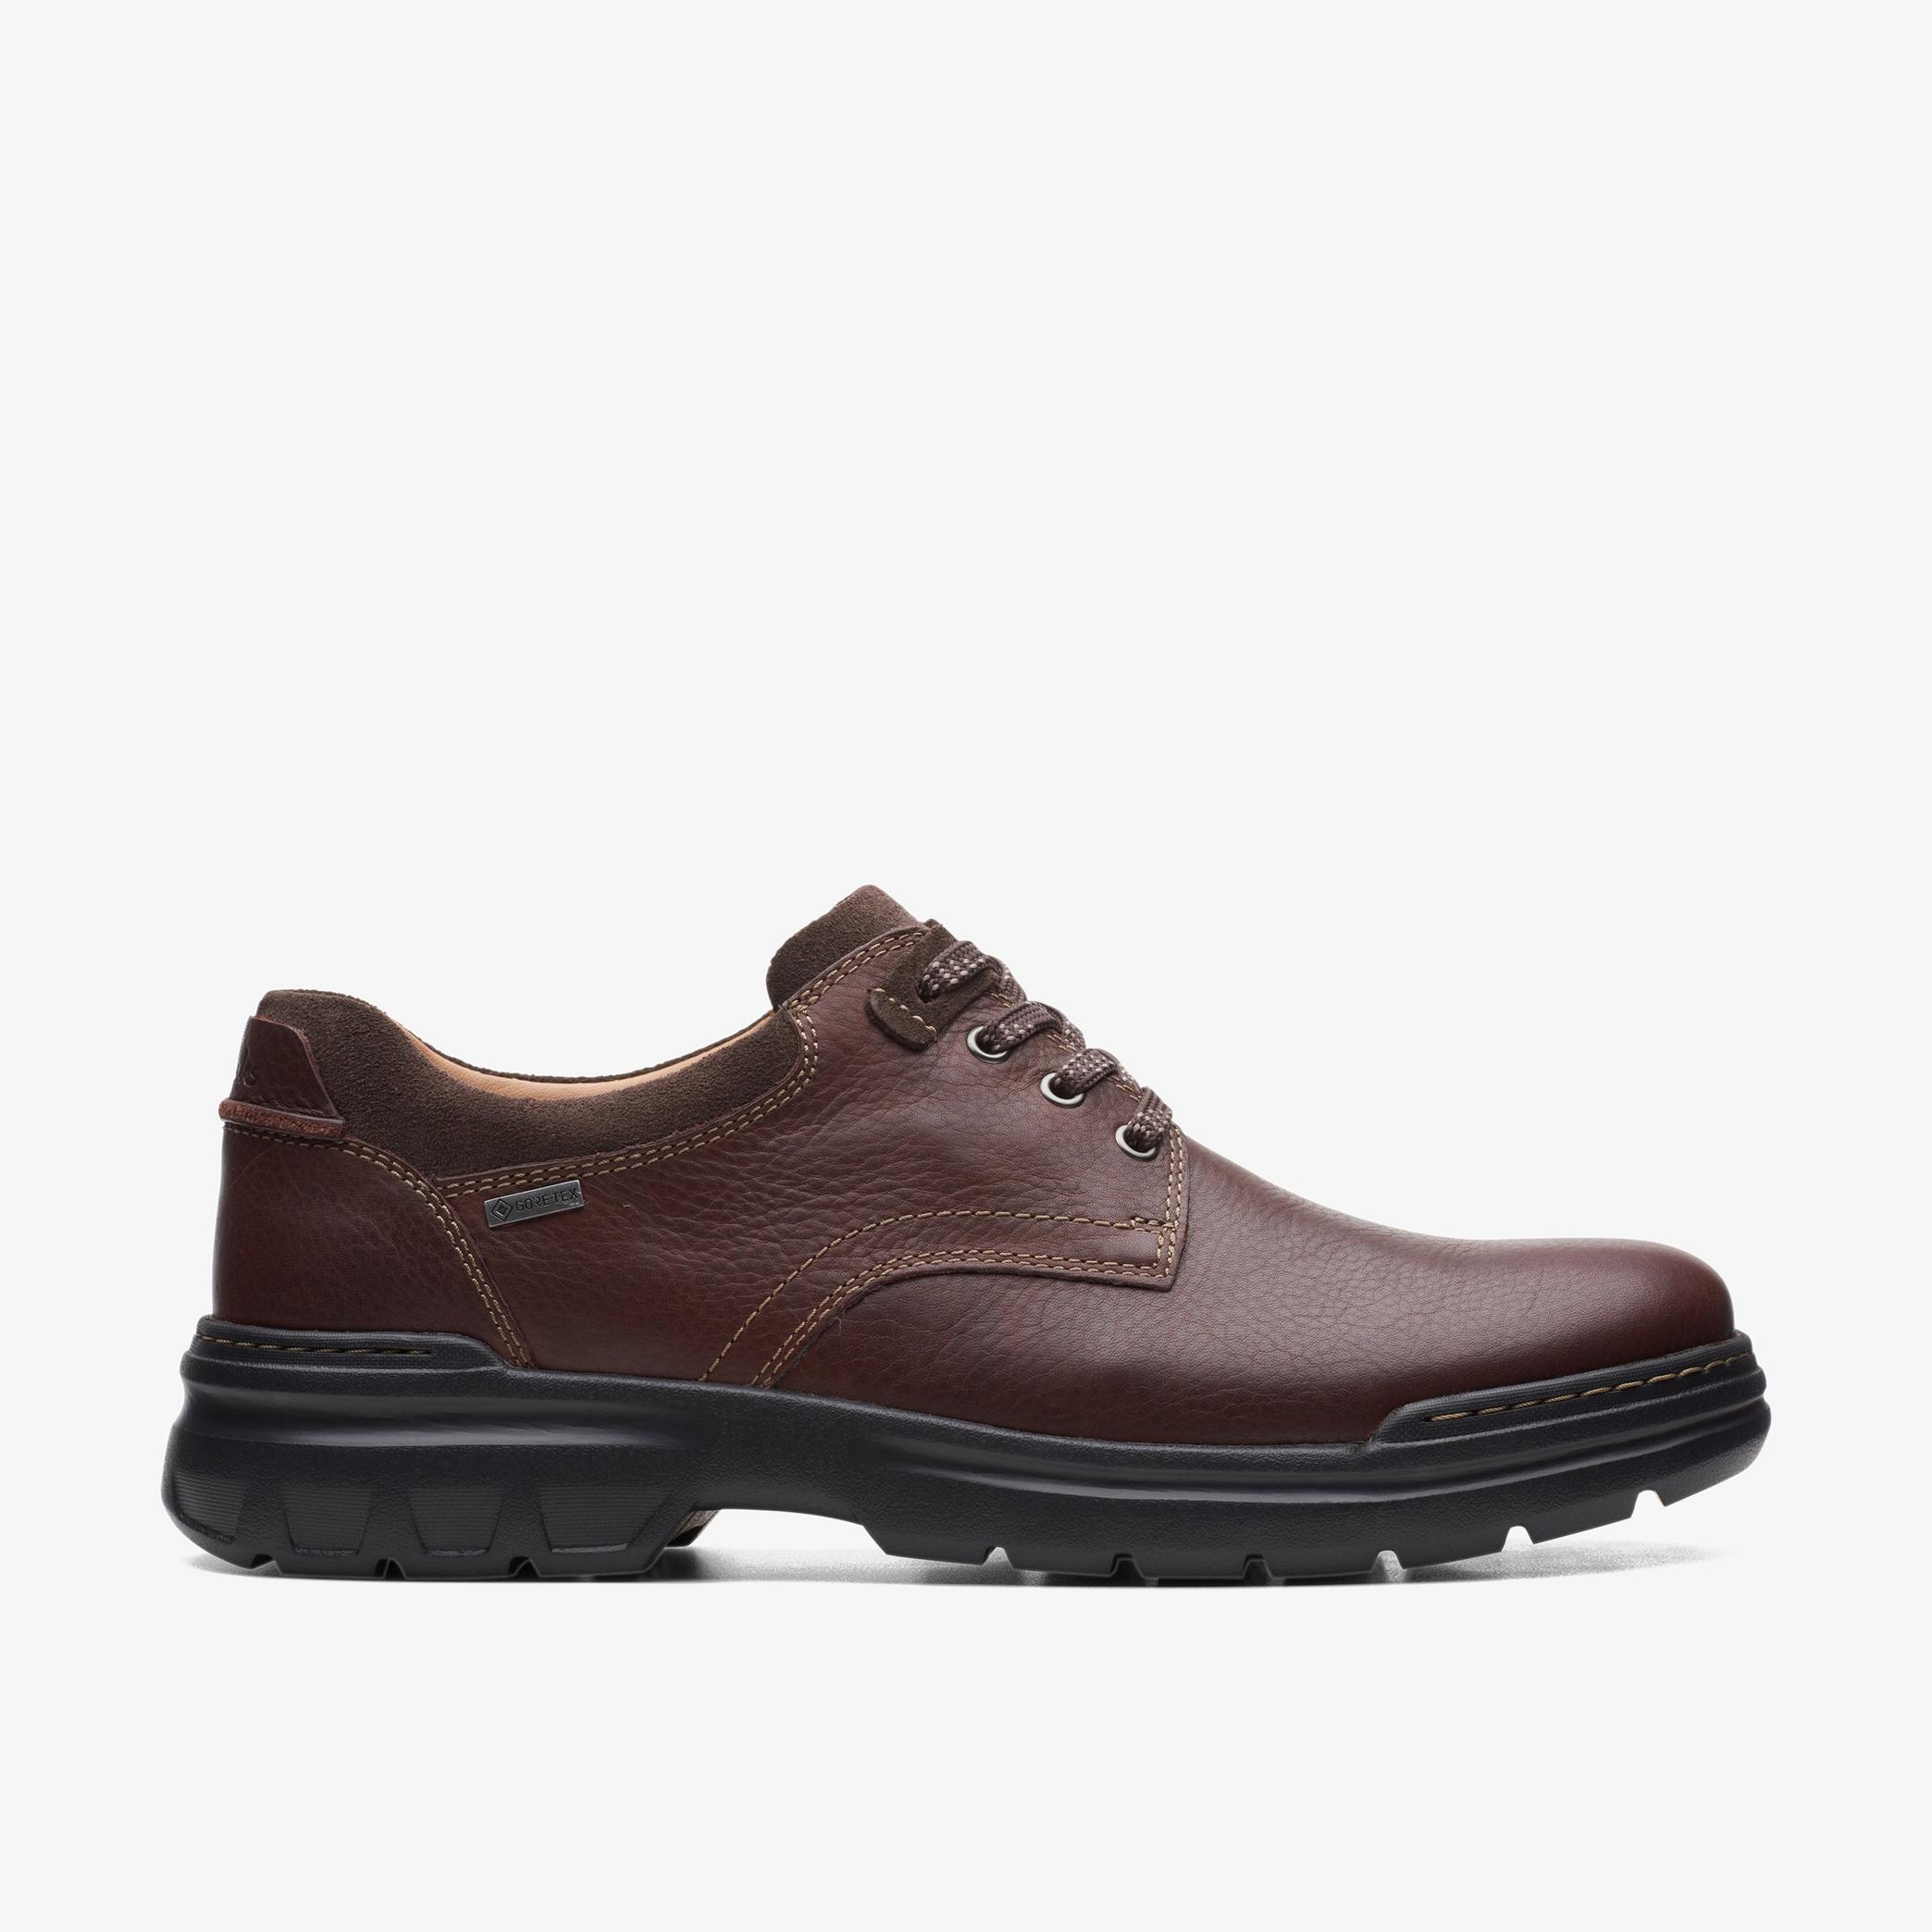 Rockie2 Lo GTX Mahogany Leather Trainers, view 1 of 6